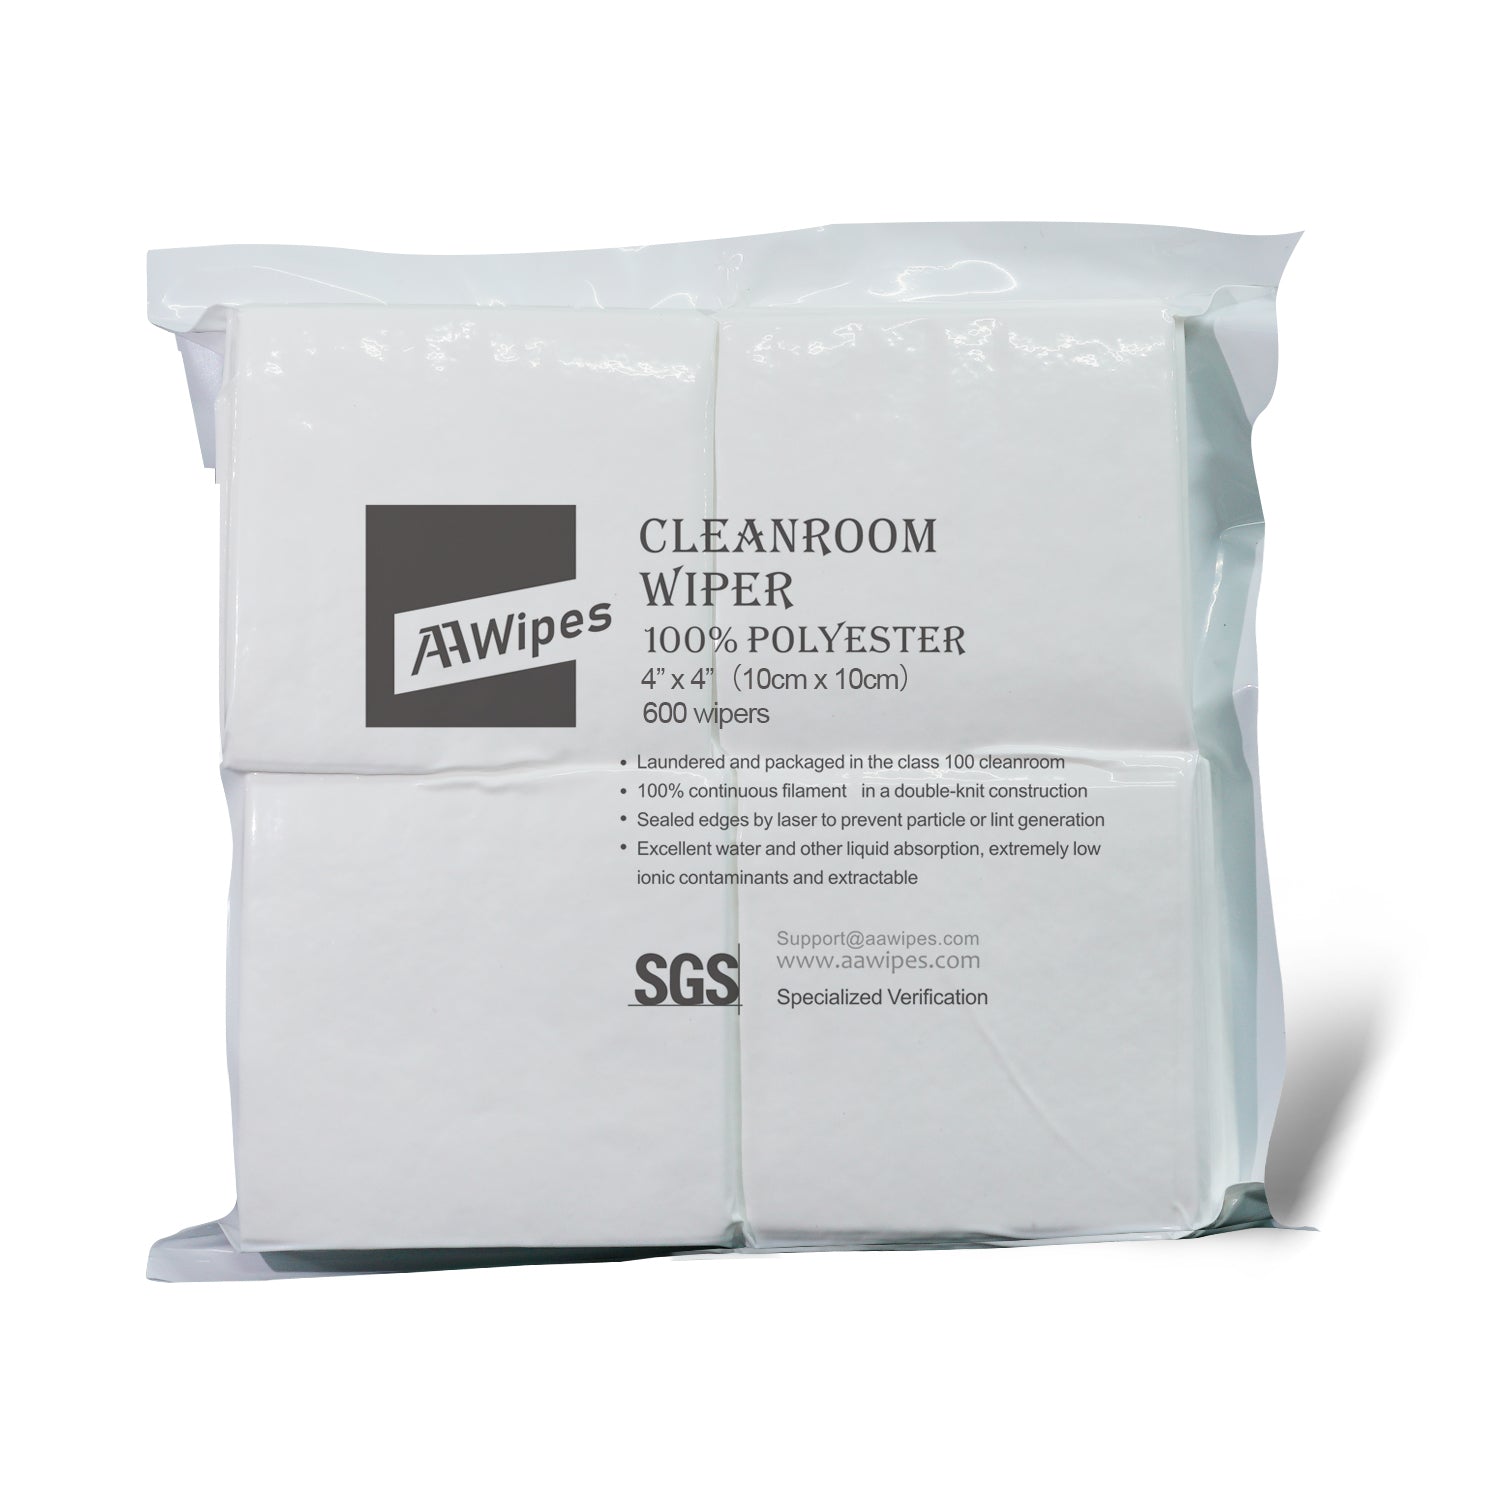 Cleanroom Double Knit 100% Polyester Wipers 4"x4" (Starting at 1 Box with 8,800 Wipes per 22 Bags) (No. CP14004)